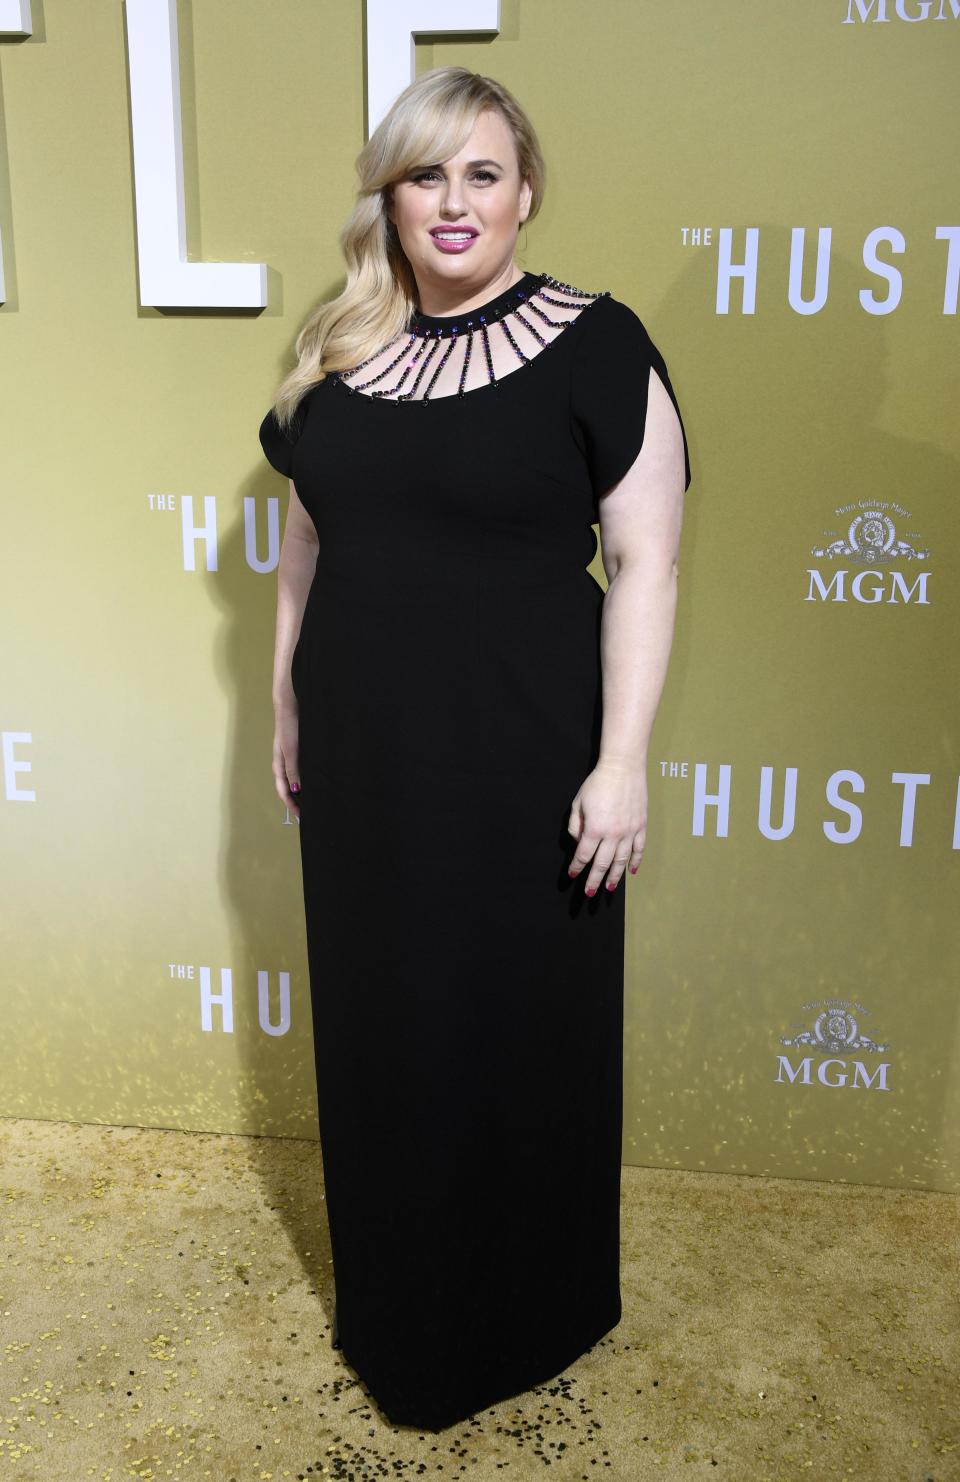 Rebel Wilson at the premiere of 'The Hustle'